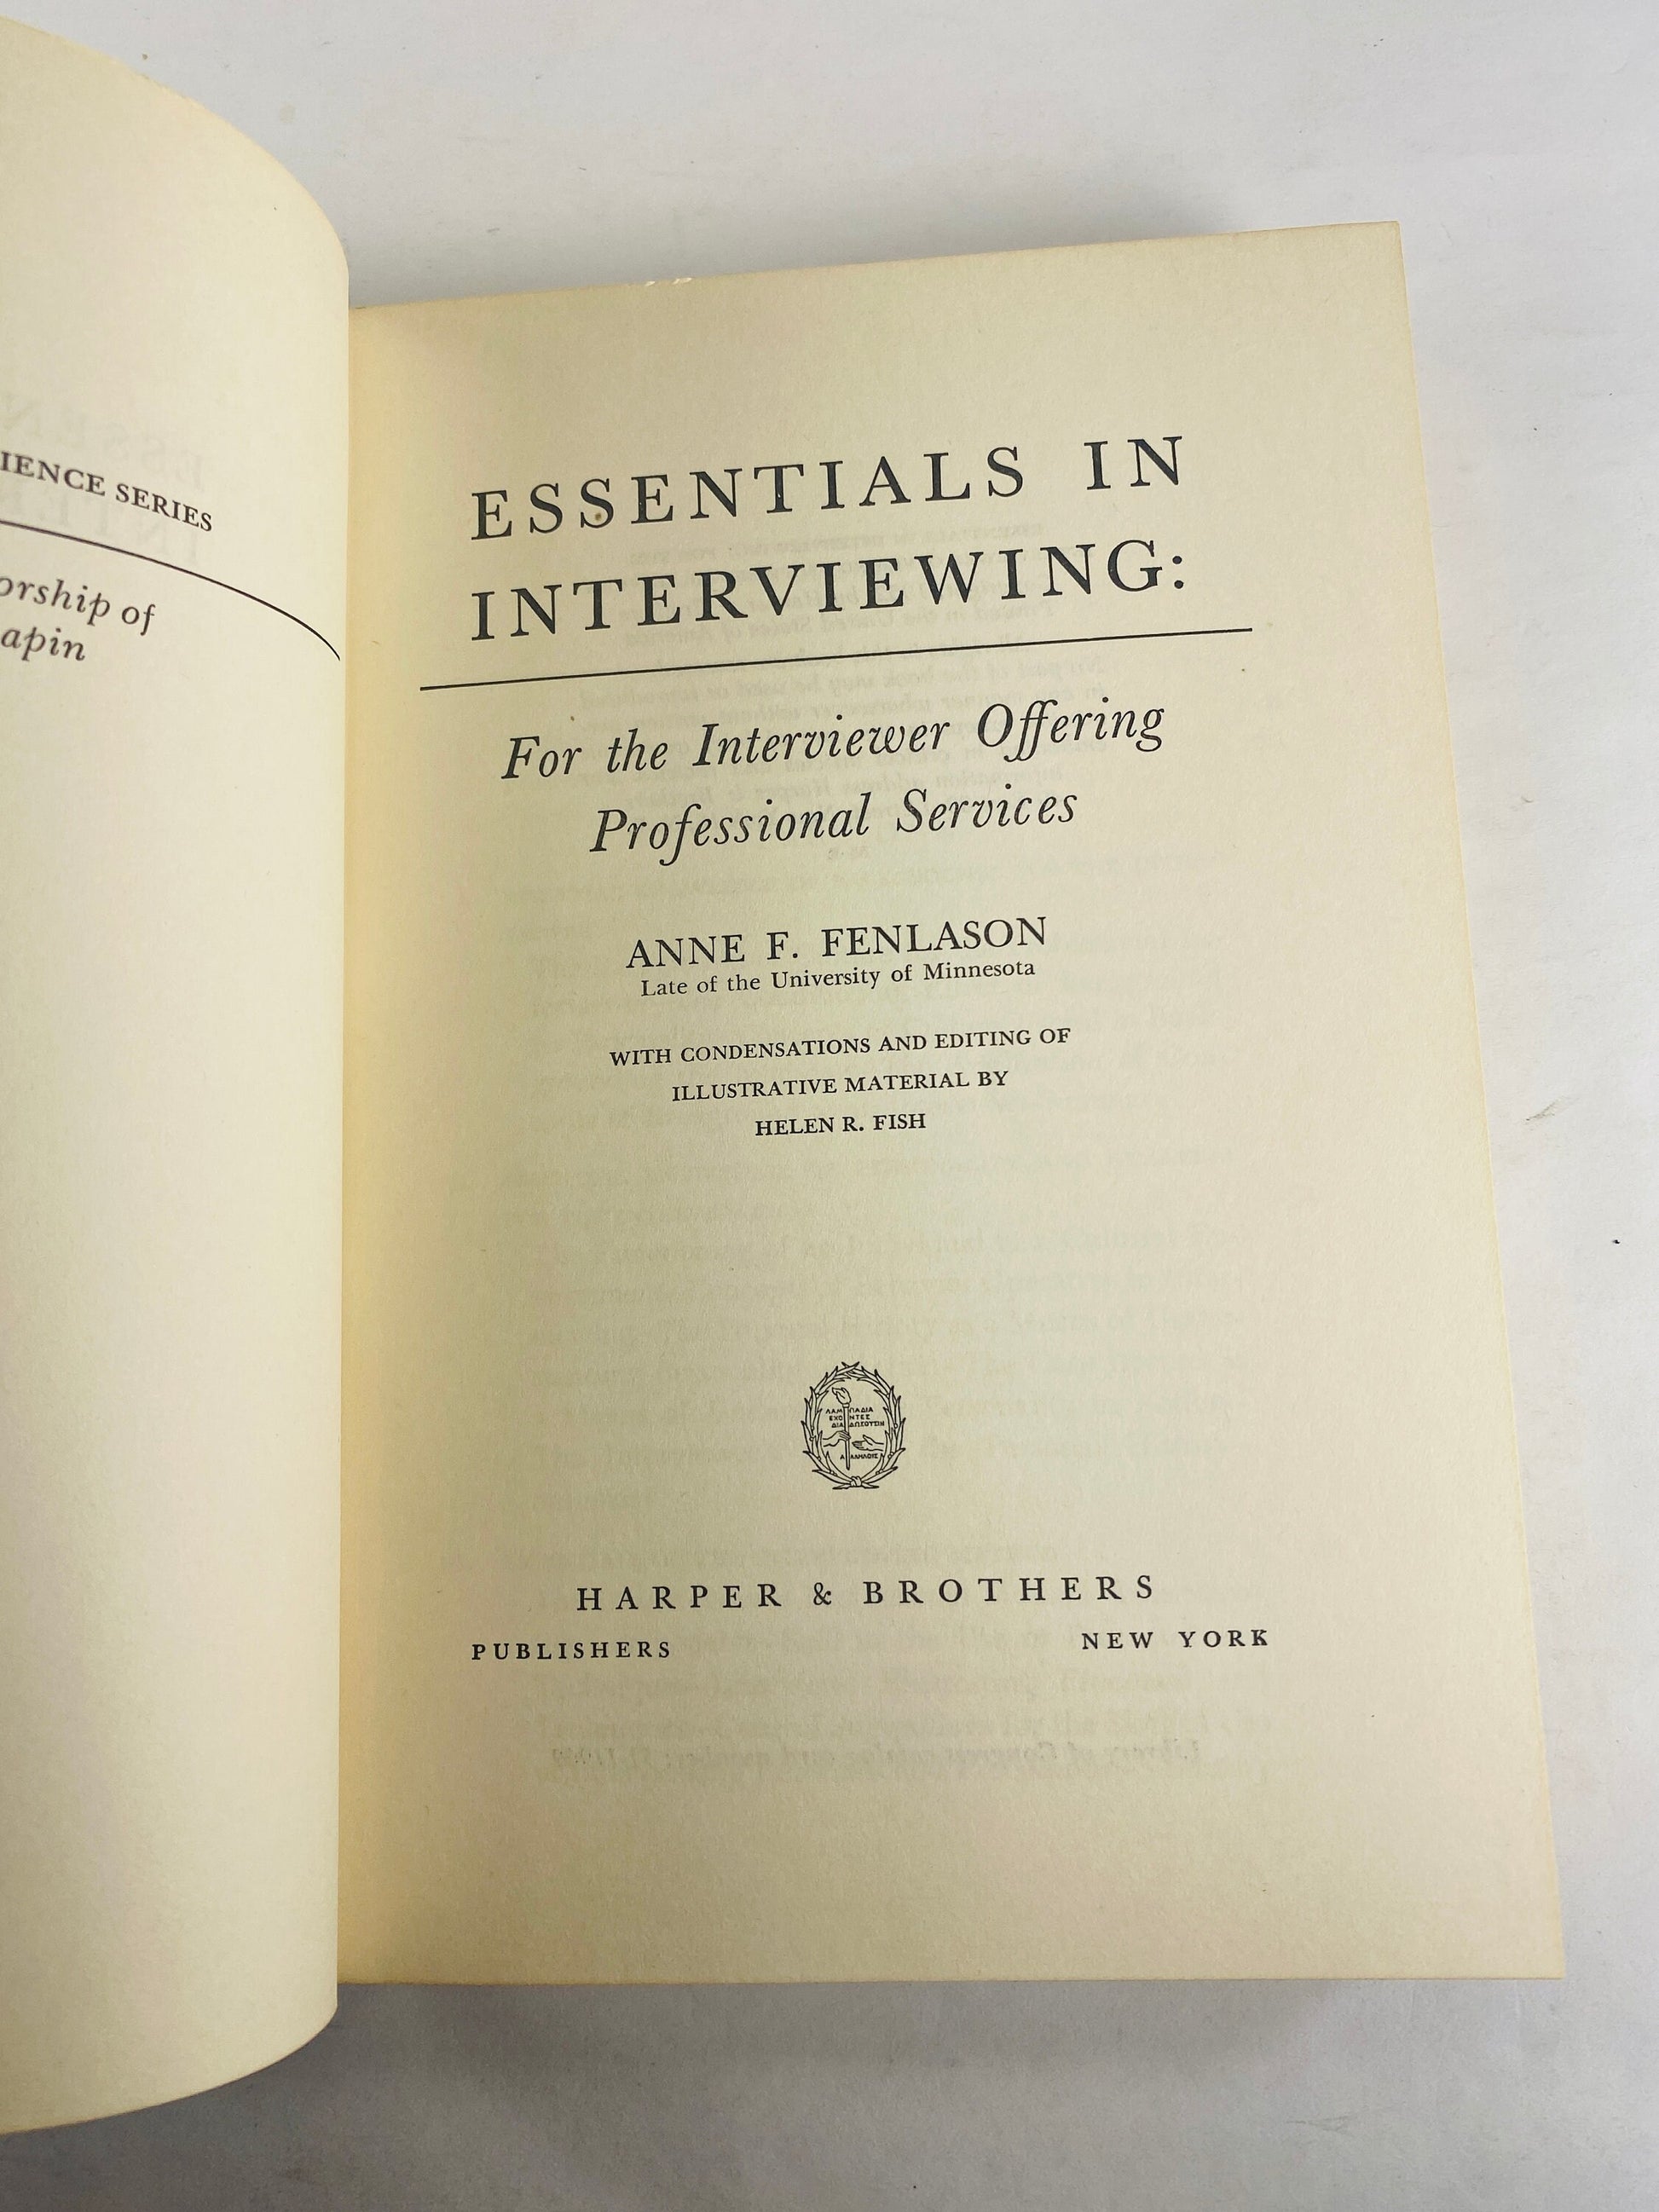 Essentials in Interviewing for the Interviewer vintage book by Anne Fenlason circa 1952. Career guidance and skills